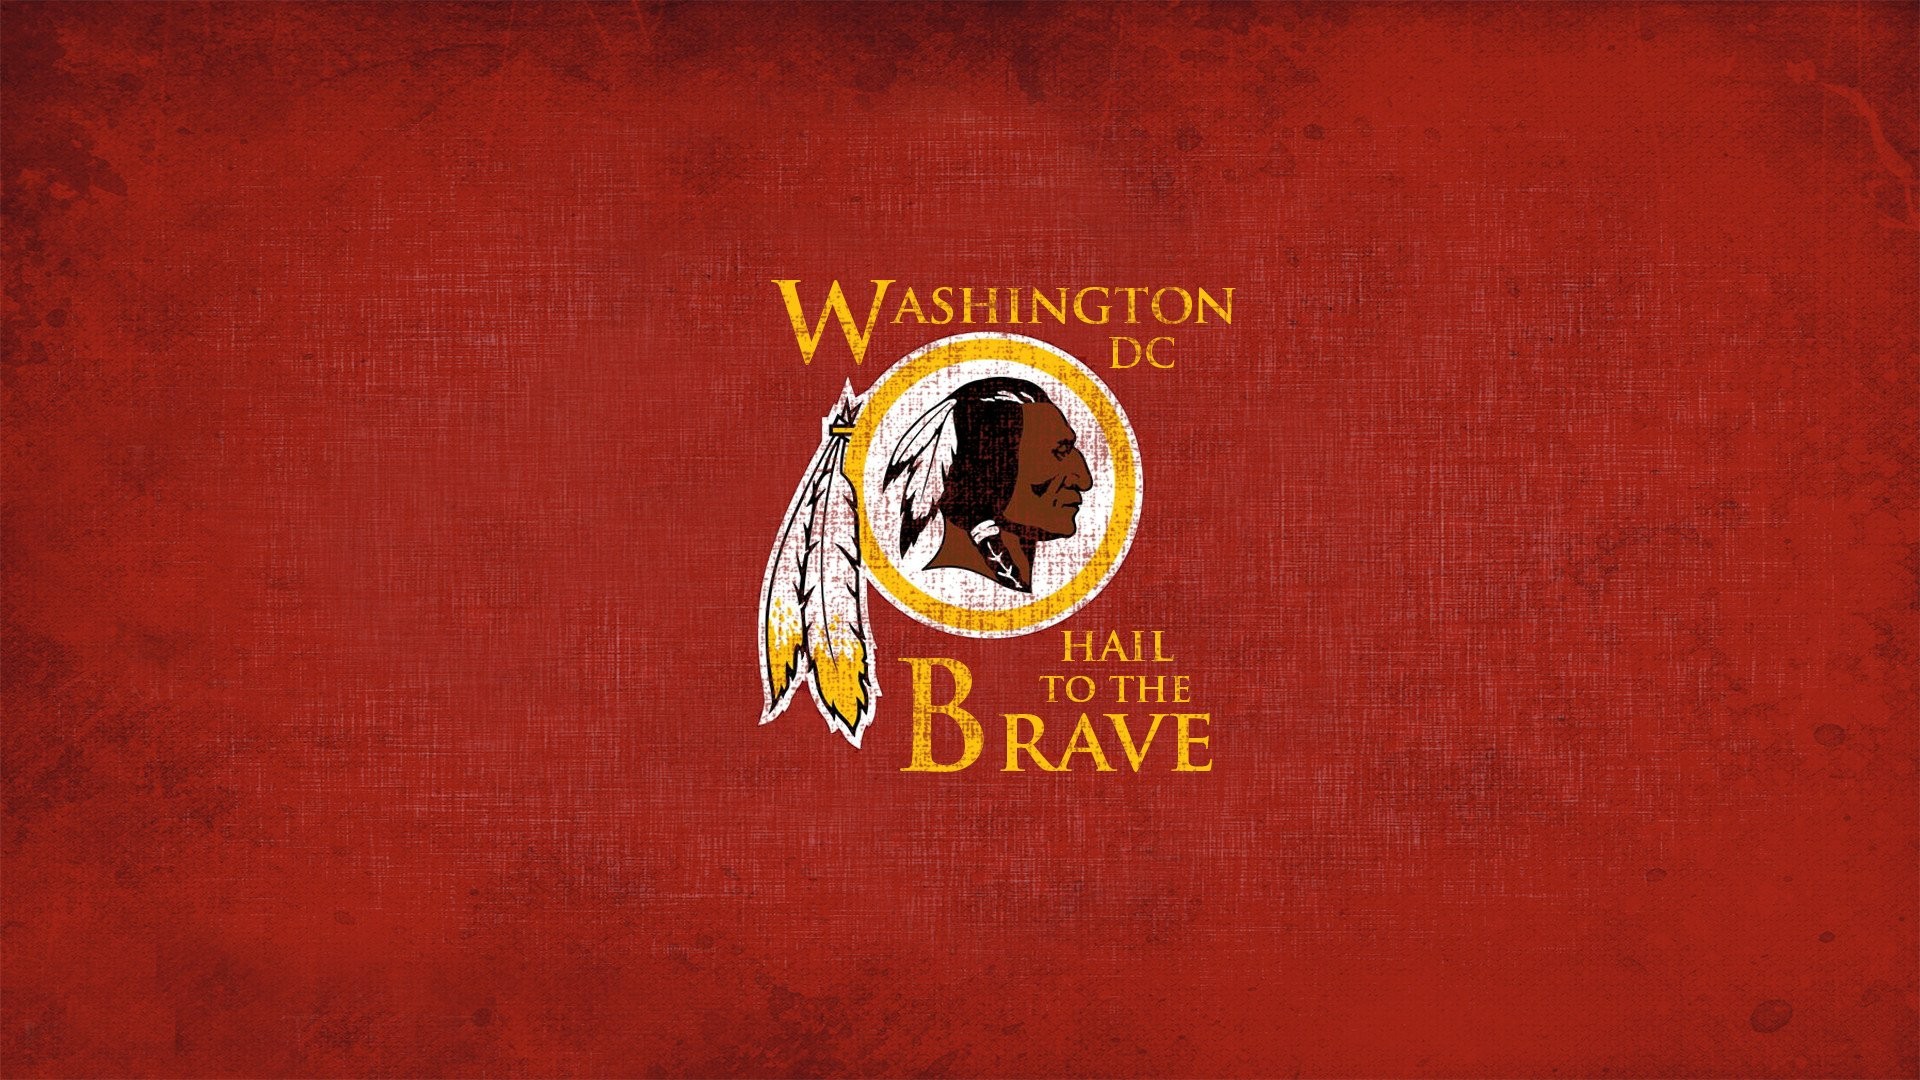 HD Washington Redskins Backgrounds With high-resolution 1920X1080 pixel. You can use this wallpaper for your Mac or Windows Desktop Background, iPhone, Android or Tablet and another Smartphone device